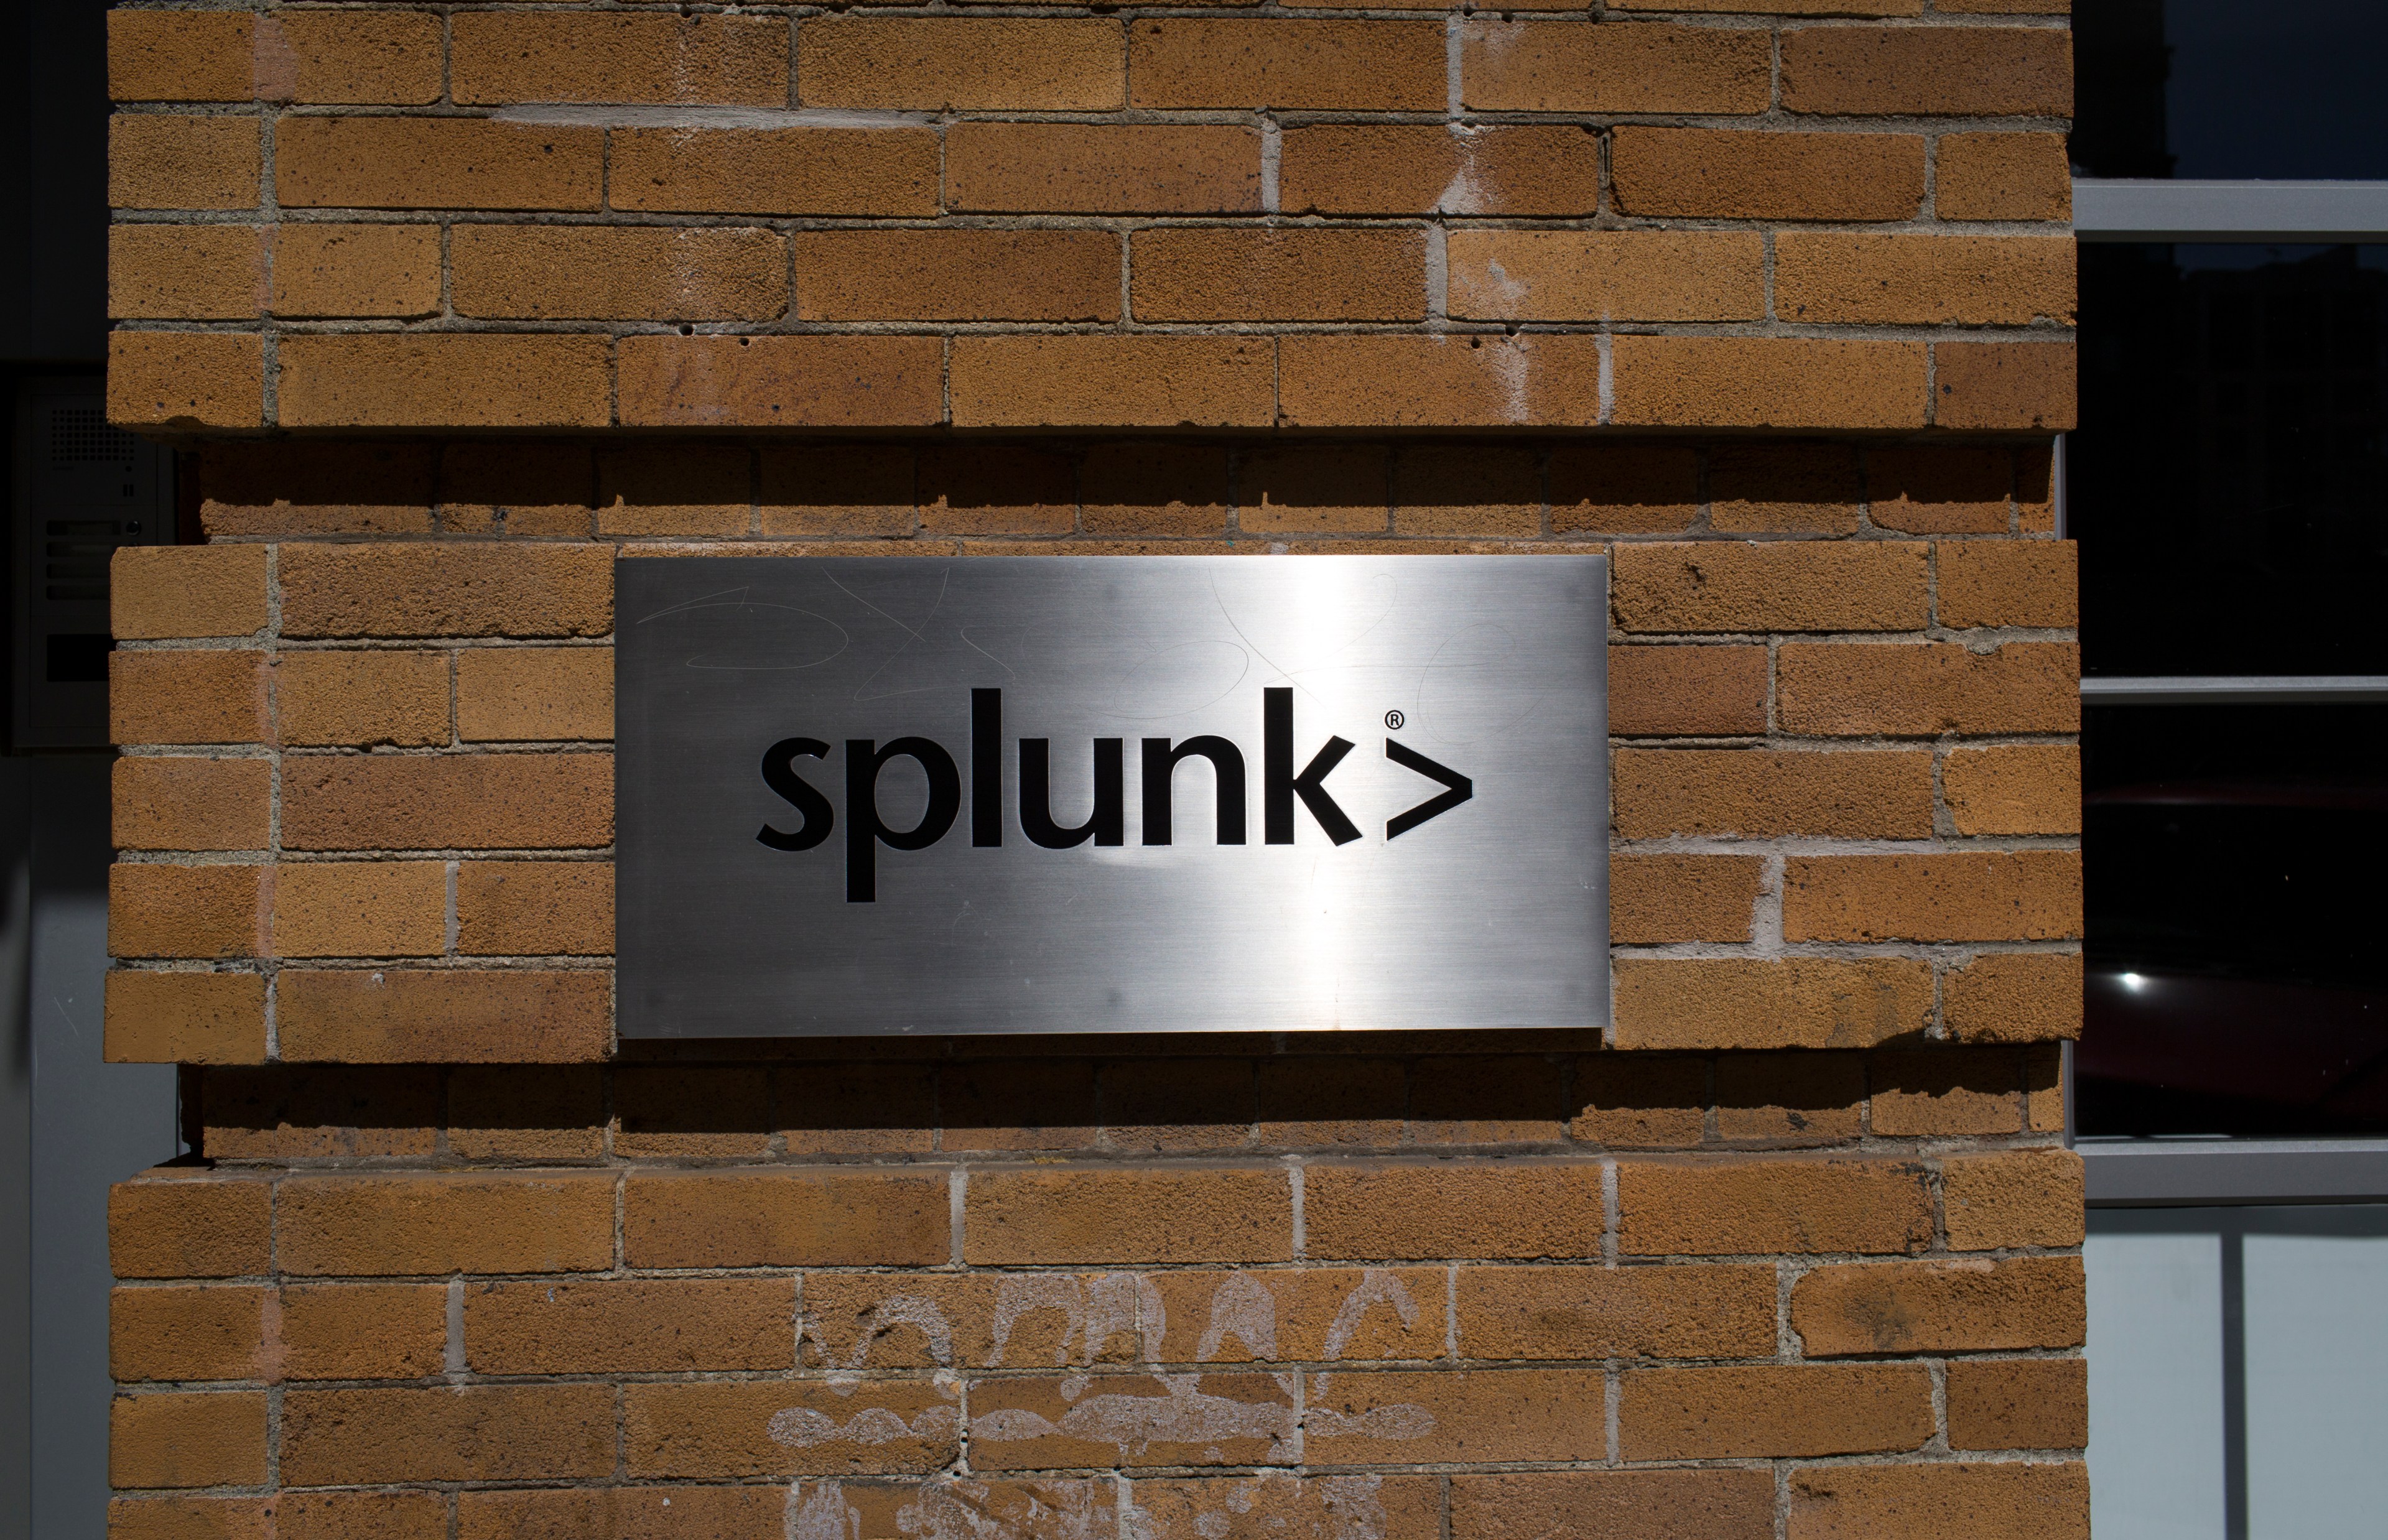 A silver-colored brushed metal sign mounted to a brick wall shines in sunlight. On the sign in lower case black lettering is a company logo.